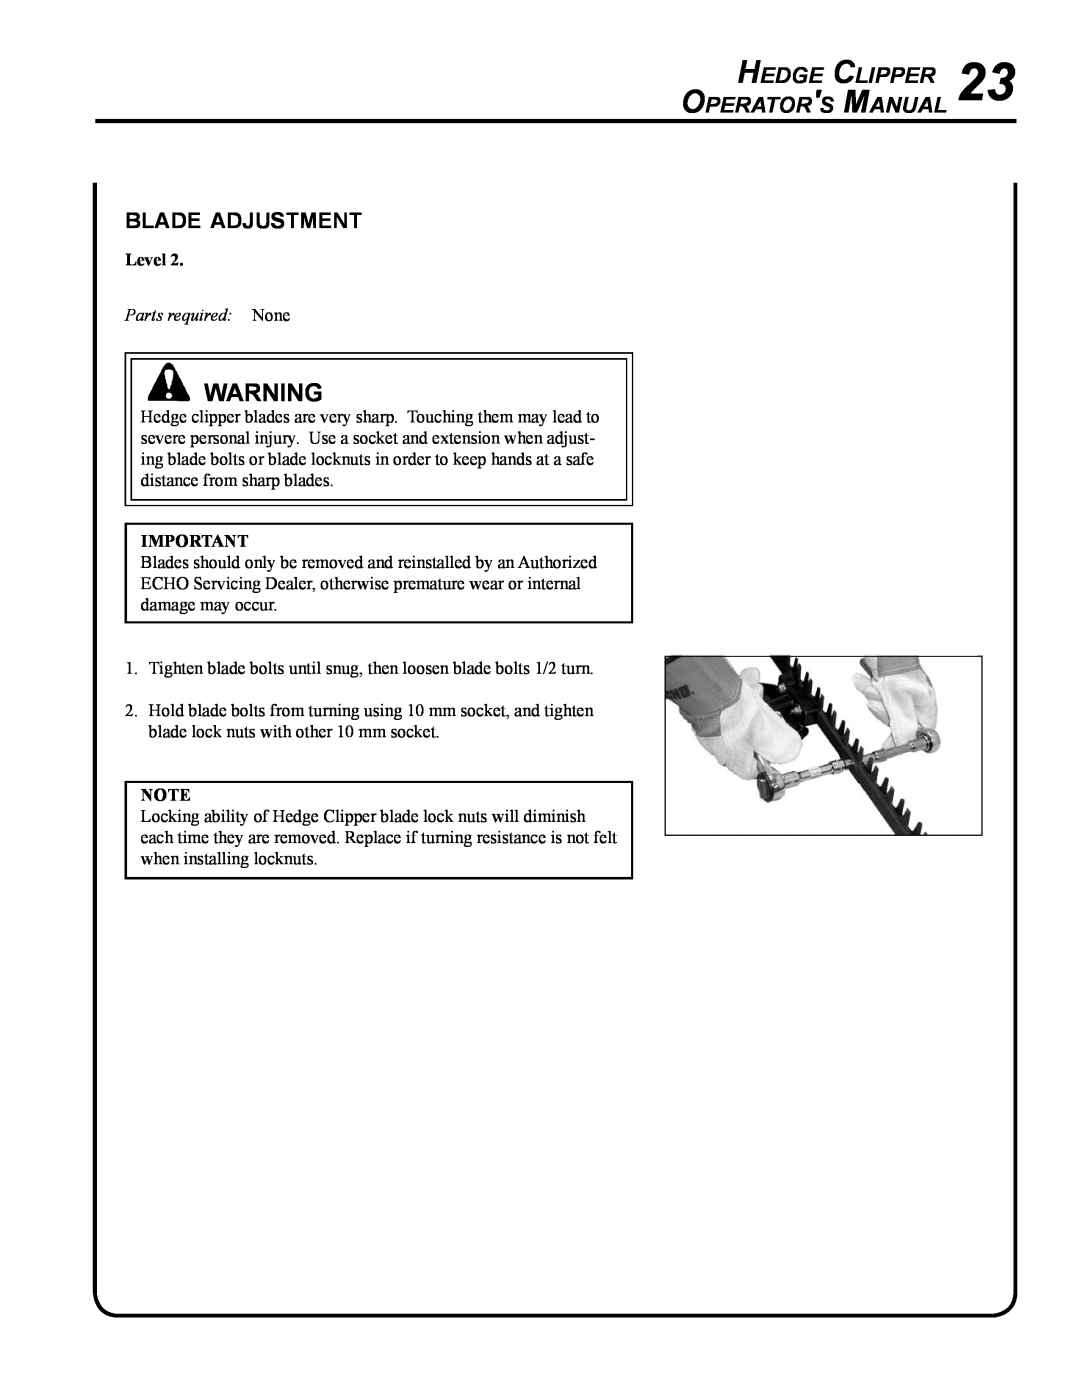 Echo HC-235 manual blade adjustment, Hedge Clipper Operators Manual, Parts required None 